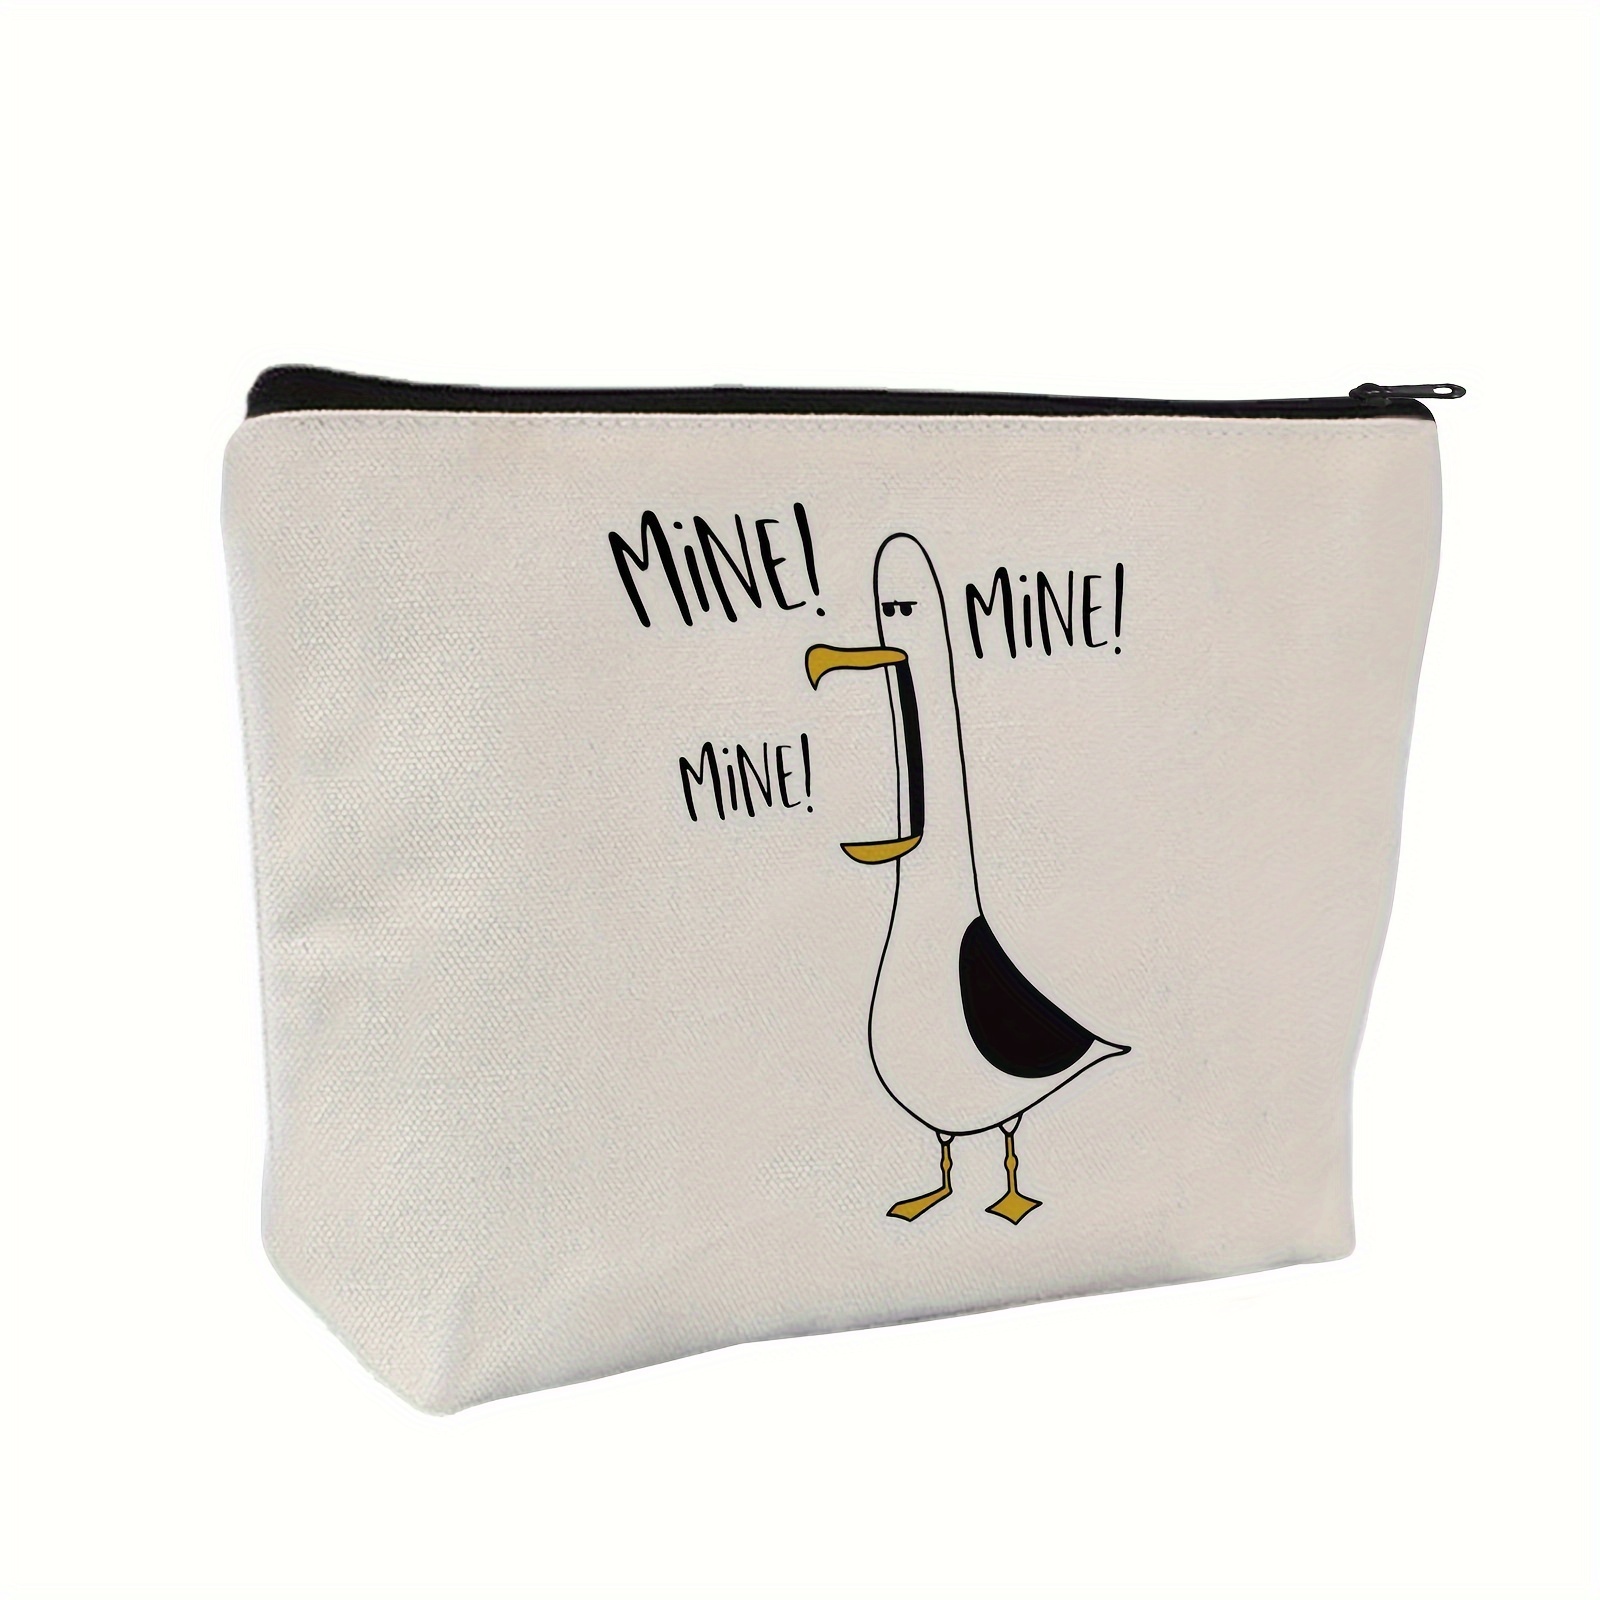 

Canvas Seagull Cosmetic Bag For Women - 1pc Unscented, Non-waterproof Makeup Pouch With Fun "mine! Mine! Mine!" Design, Ideal Gift For Seagull & Animal Lovers